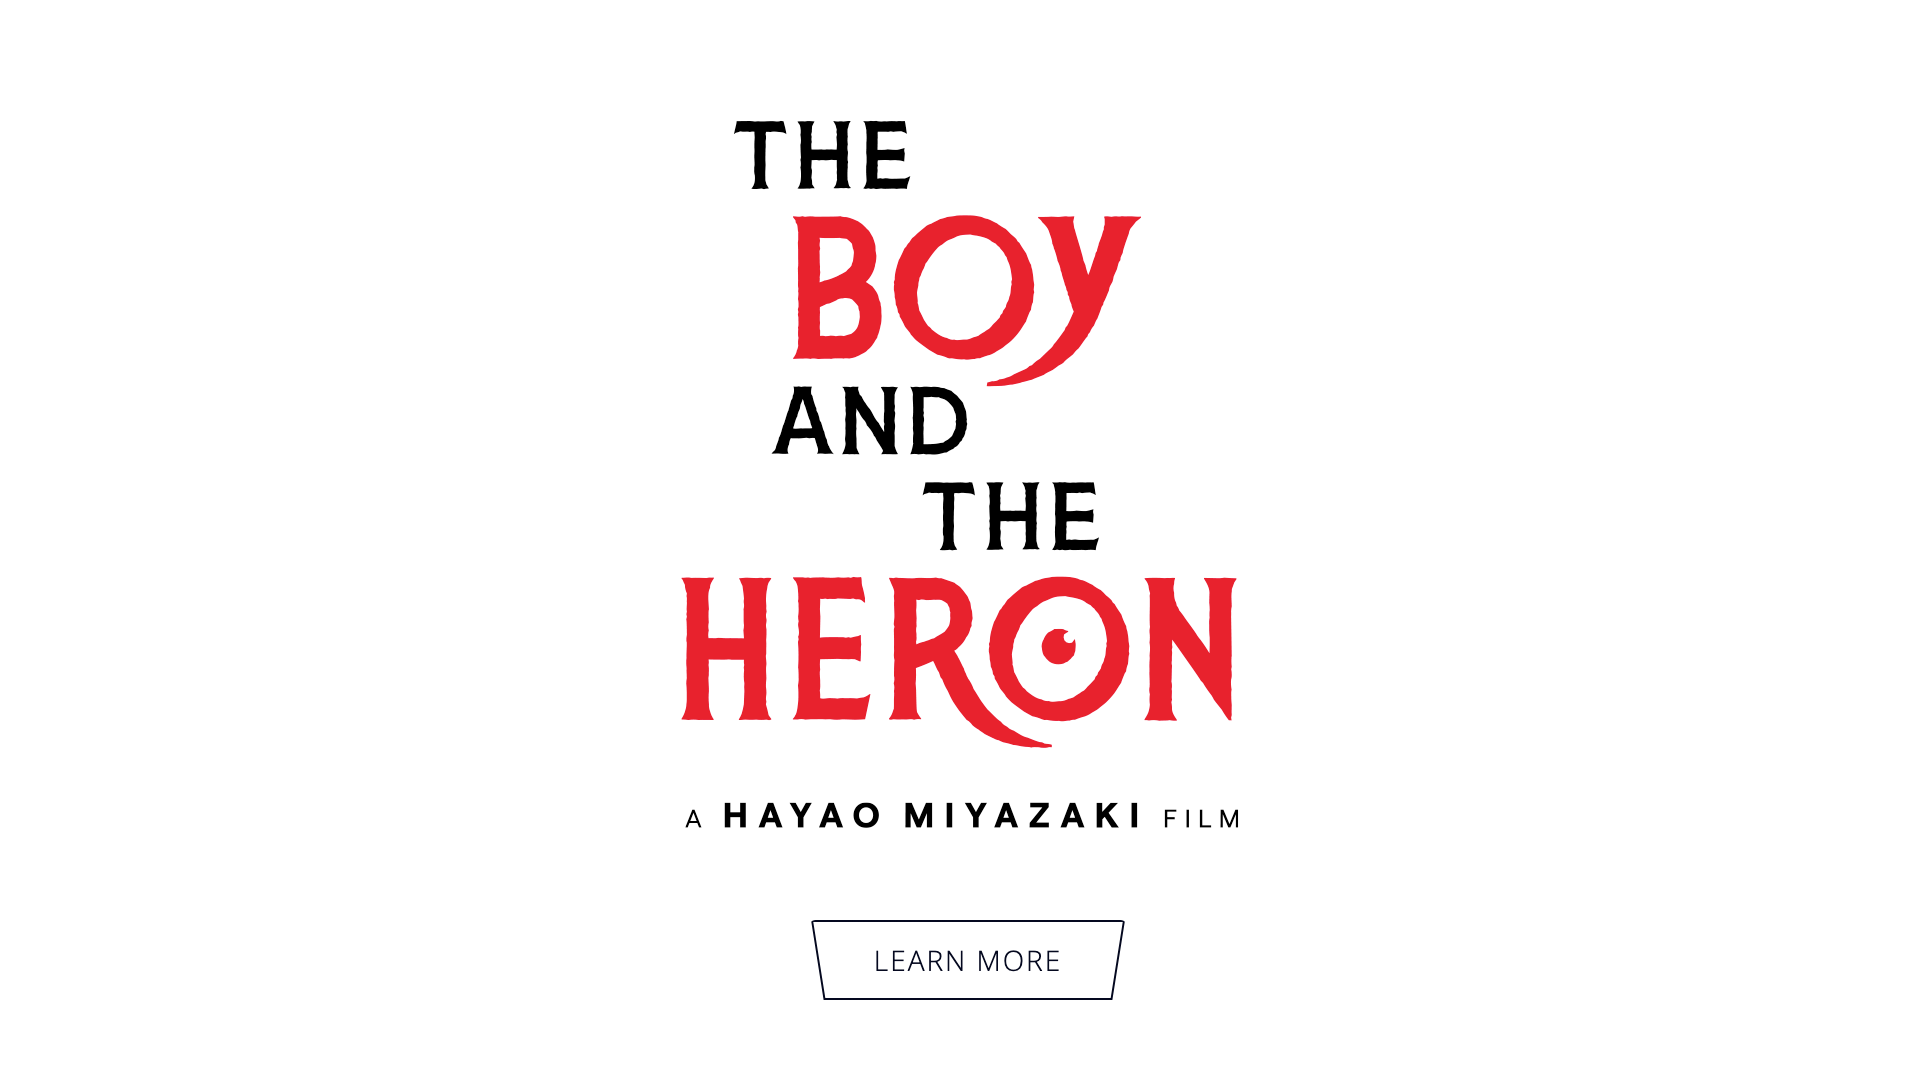 THE BOY AND THE HERON - CLICK TO LEARN MORE